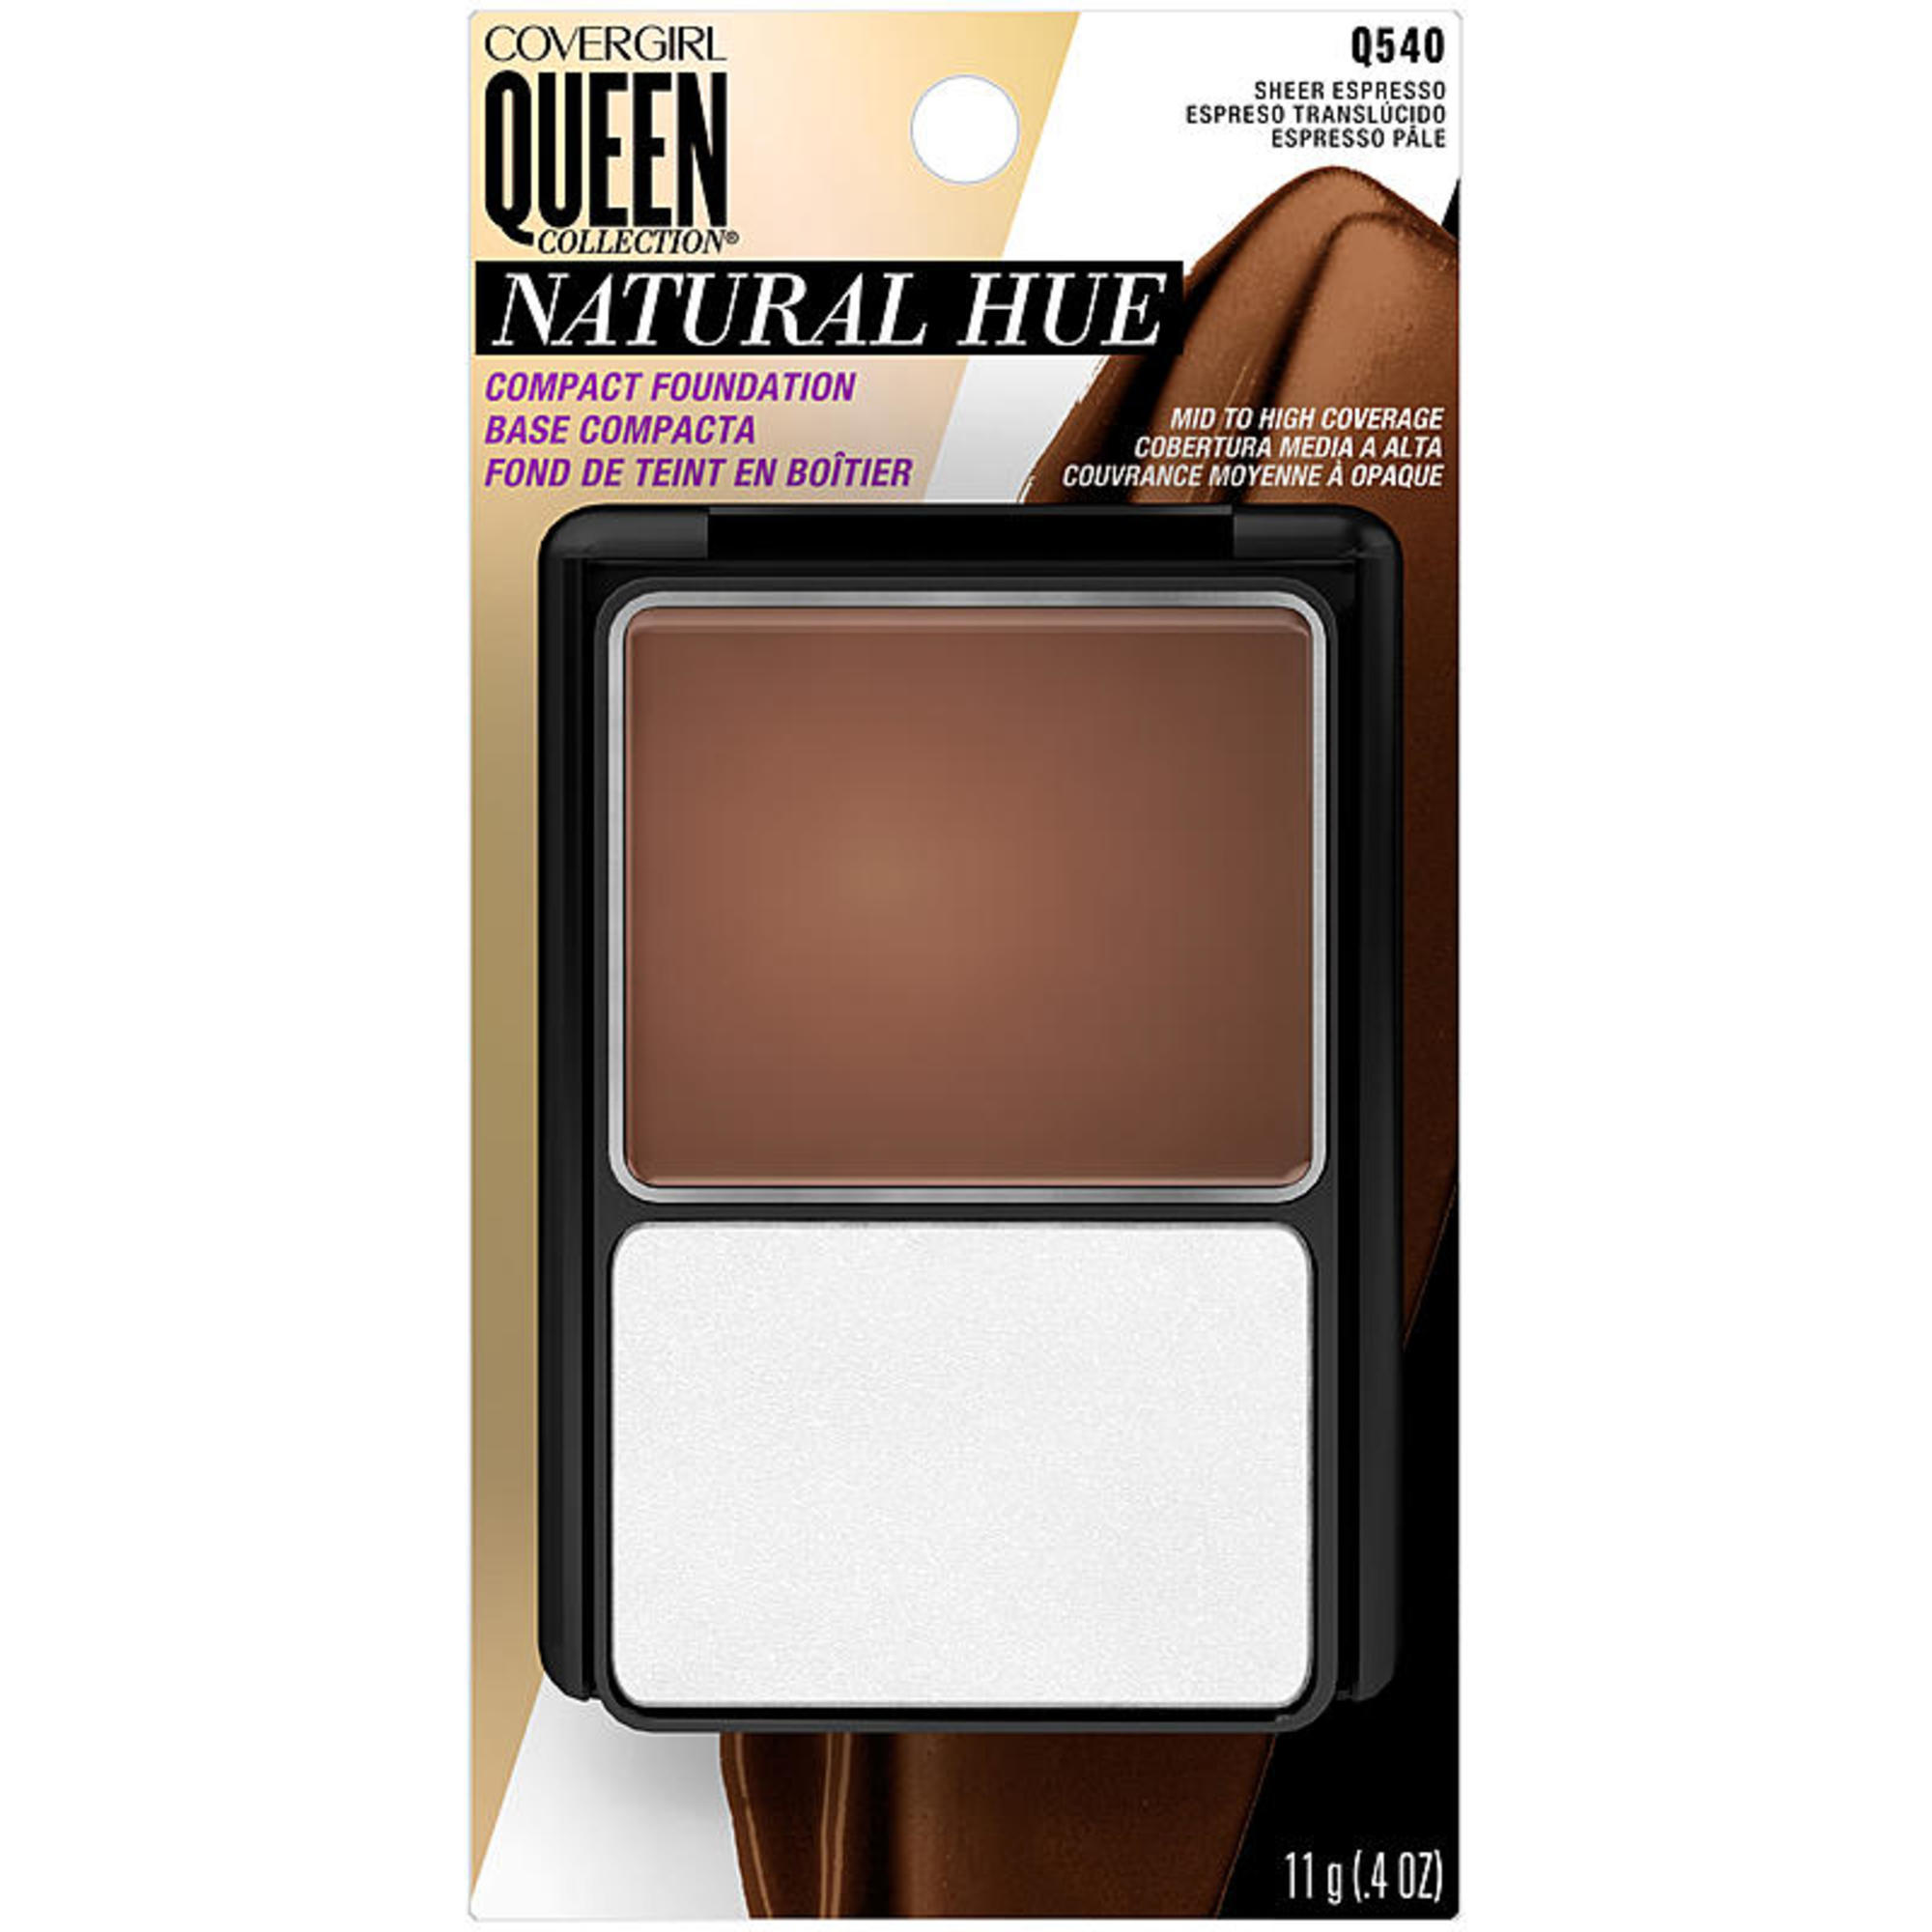 CoverGirl Queen Collection Natural Hue Compact Foundation